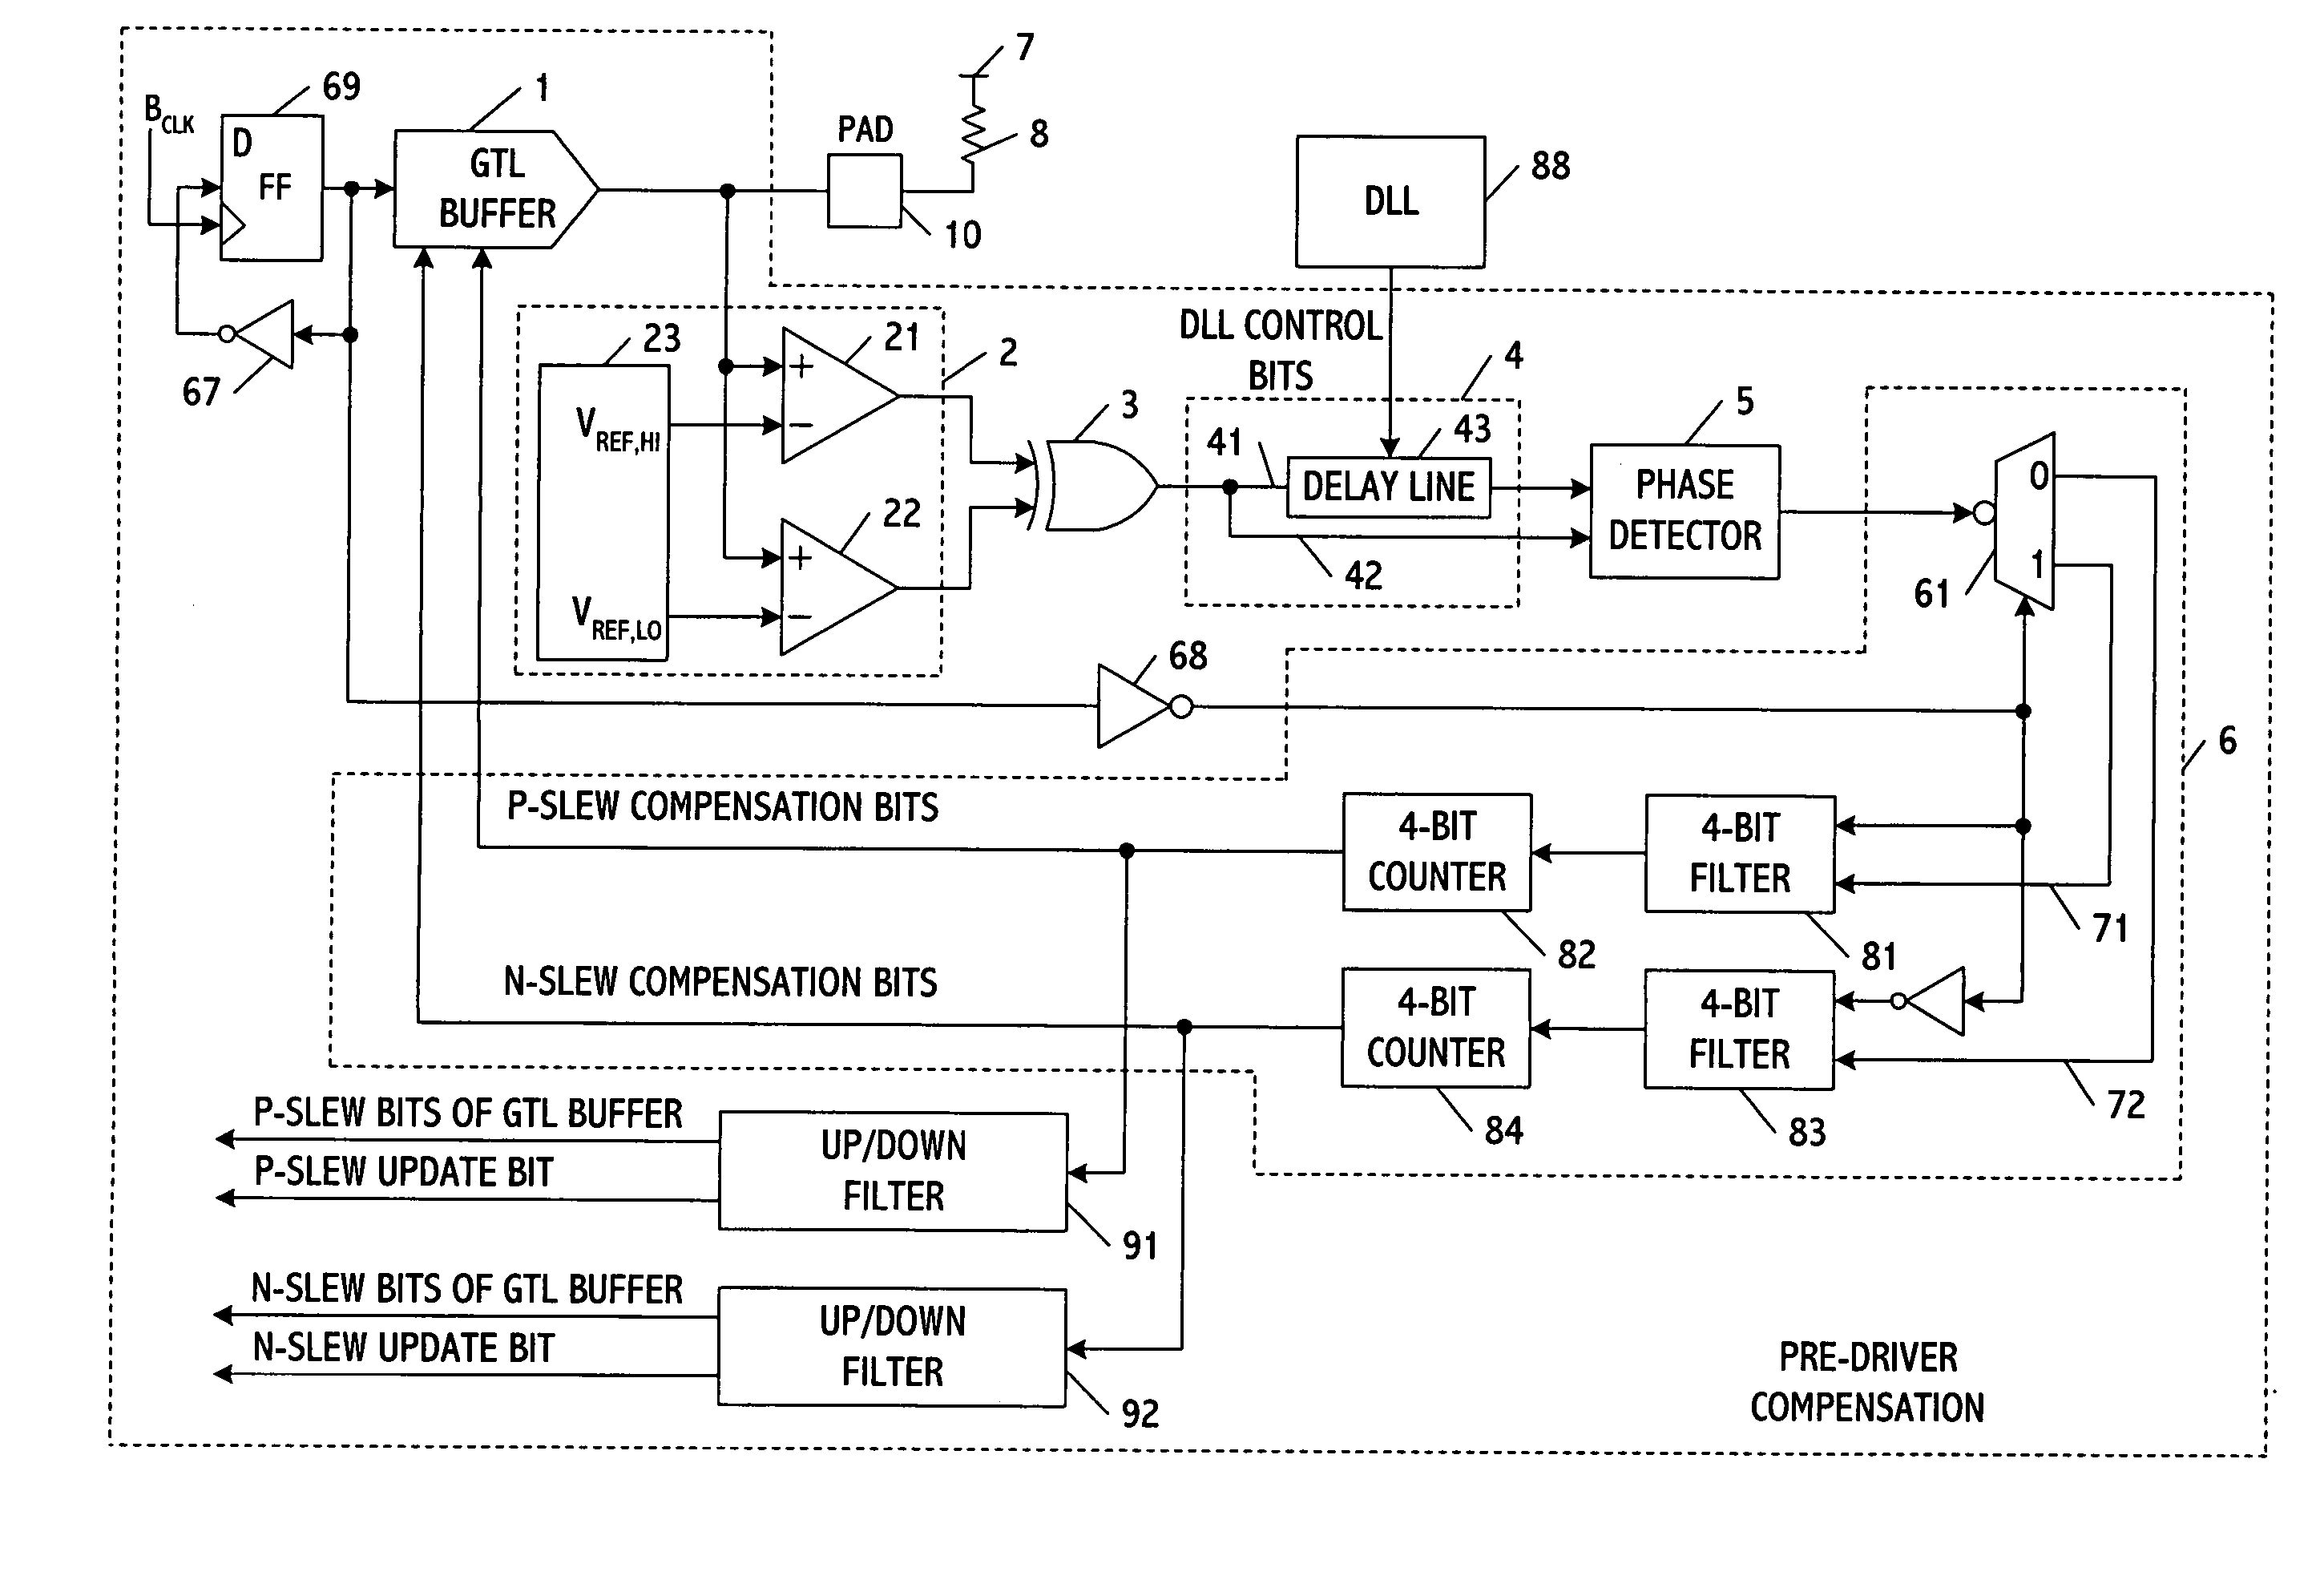 Closed-loop independent DLL-controlled rise/fall time control circuit